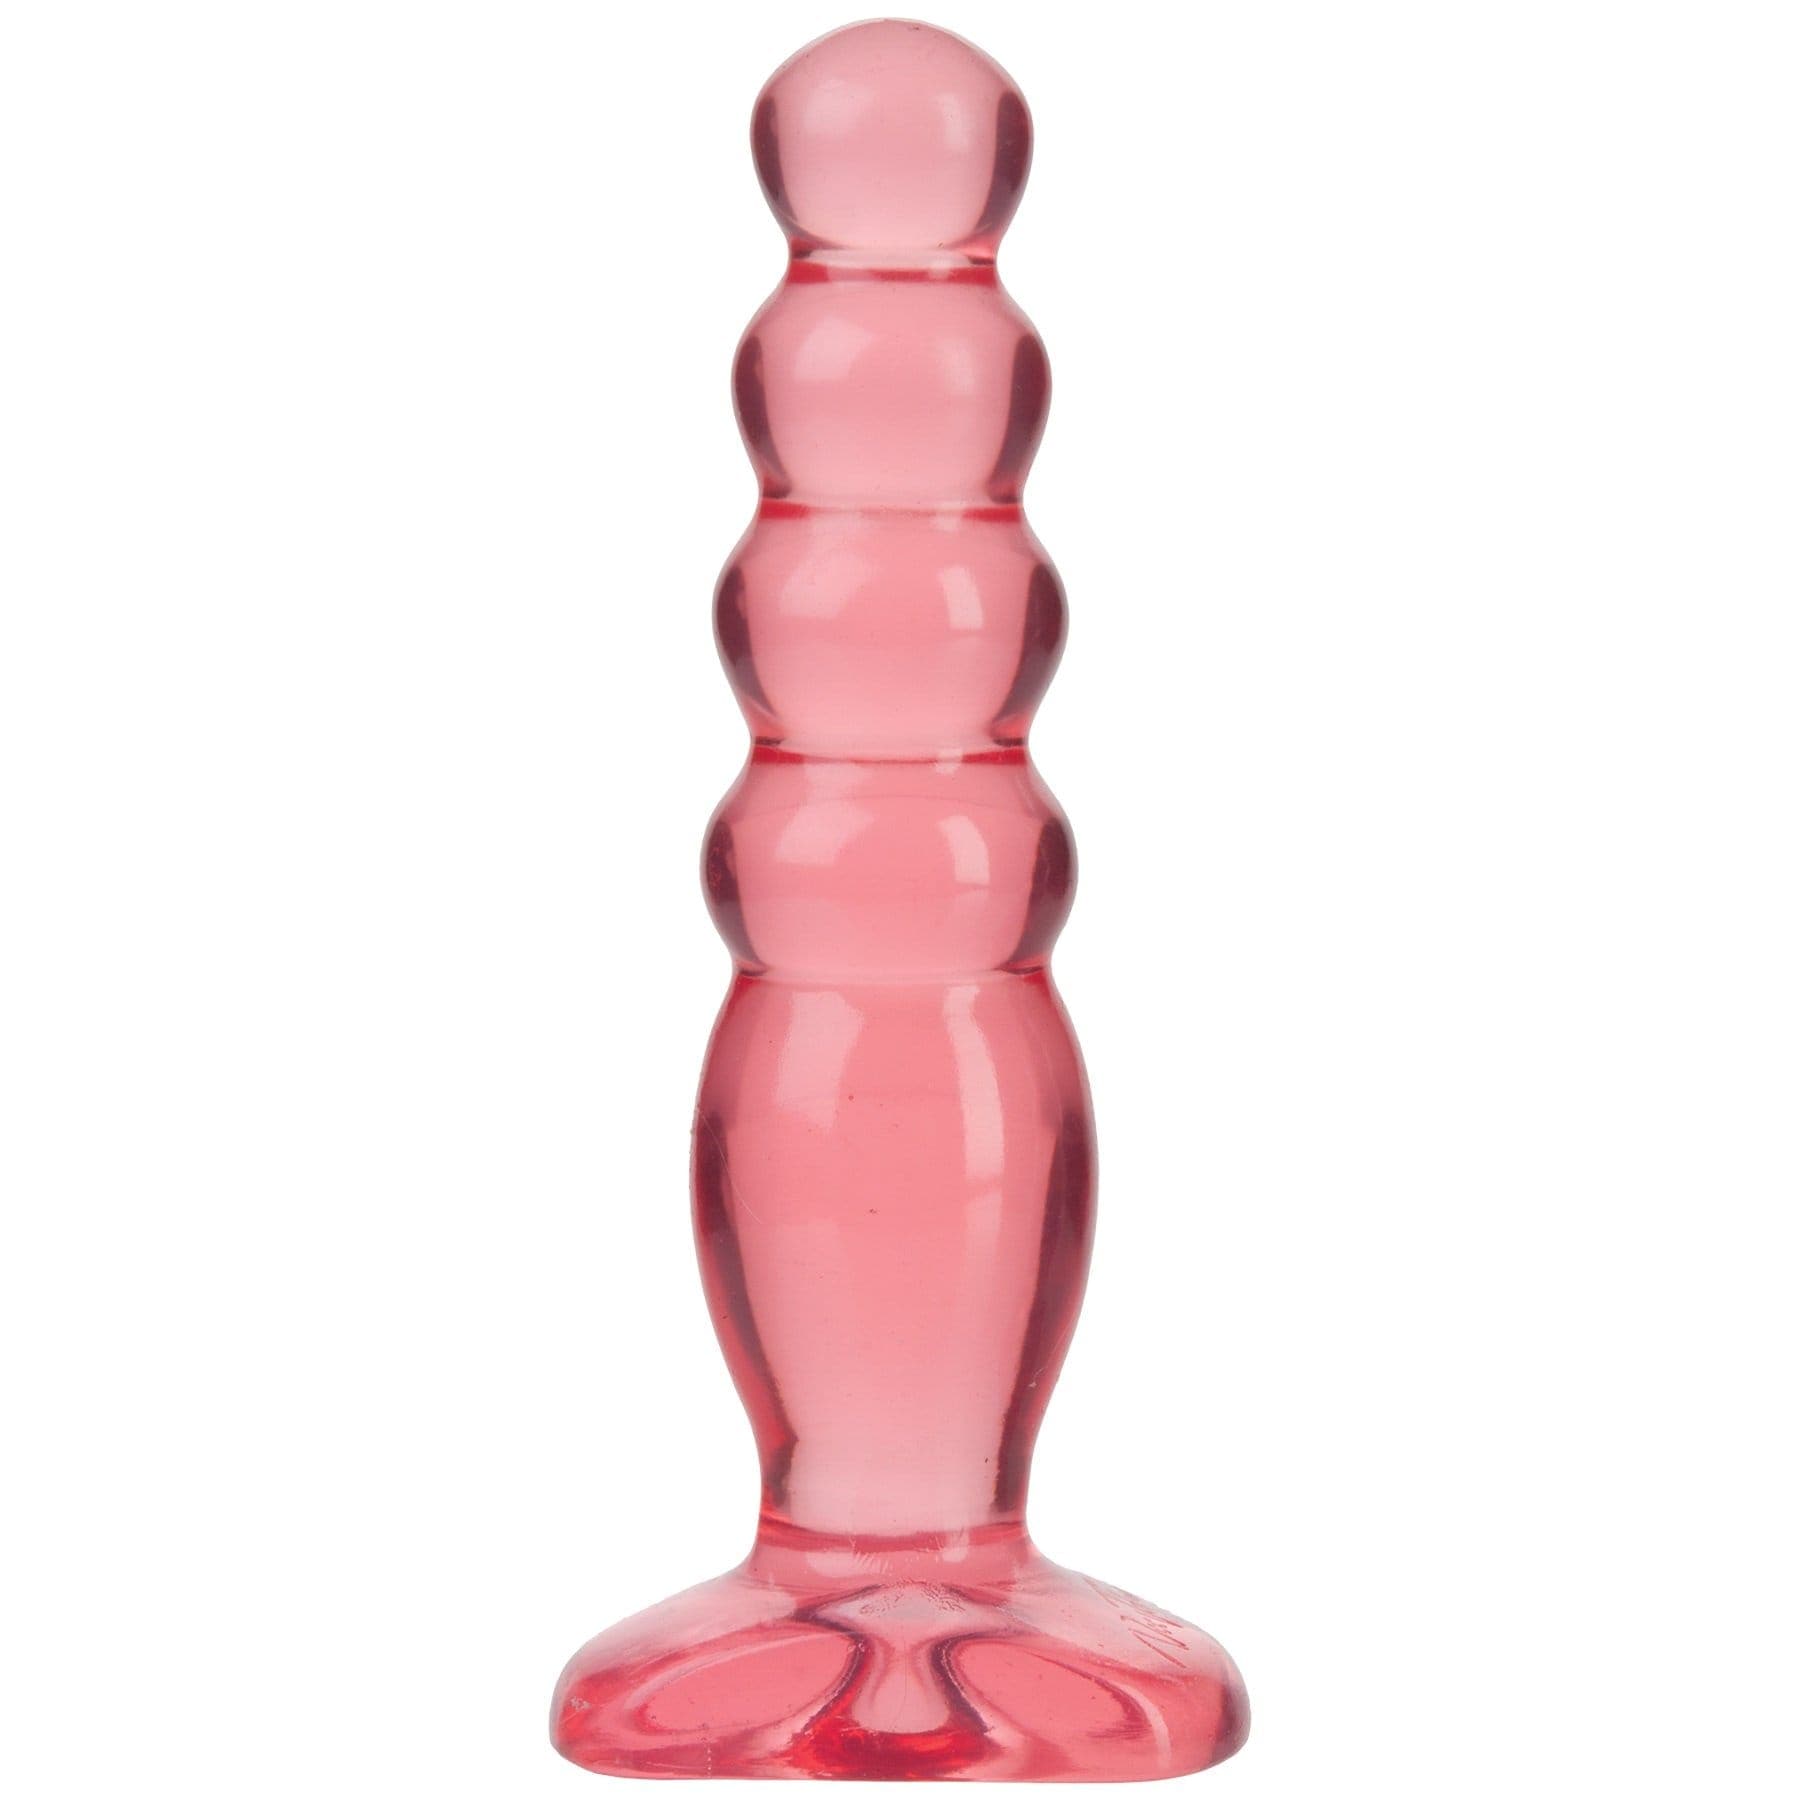 crystal jellies anal delight pink